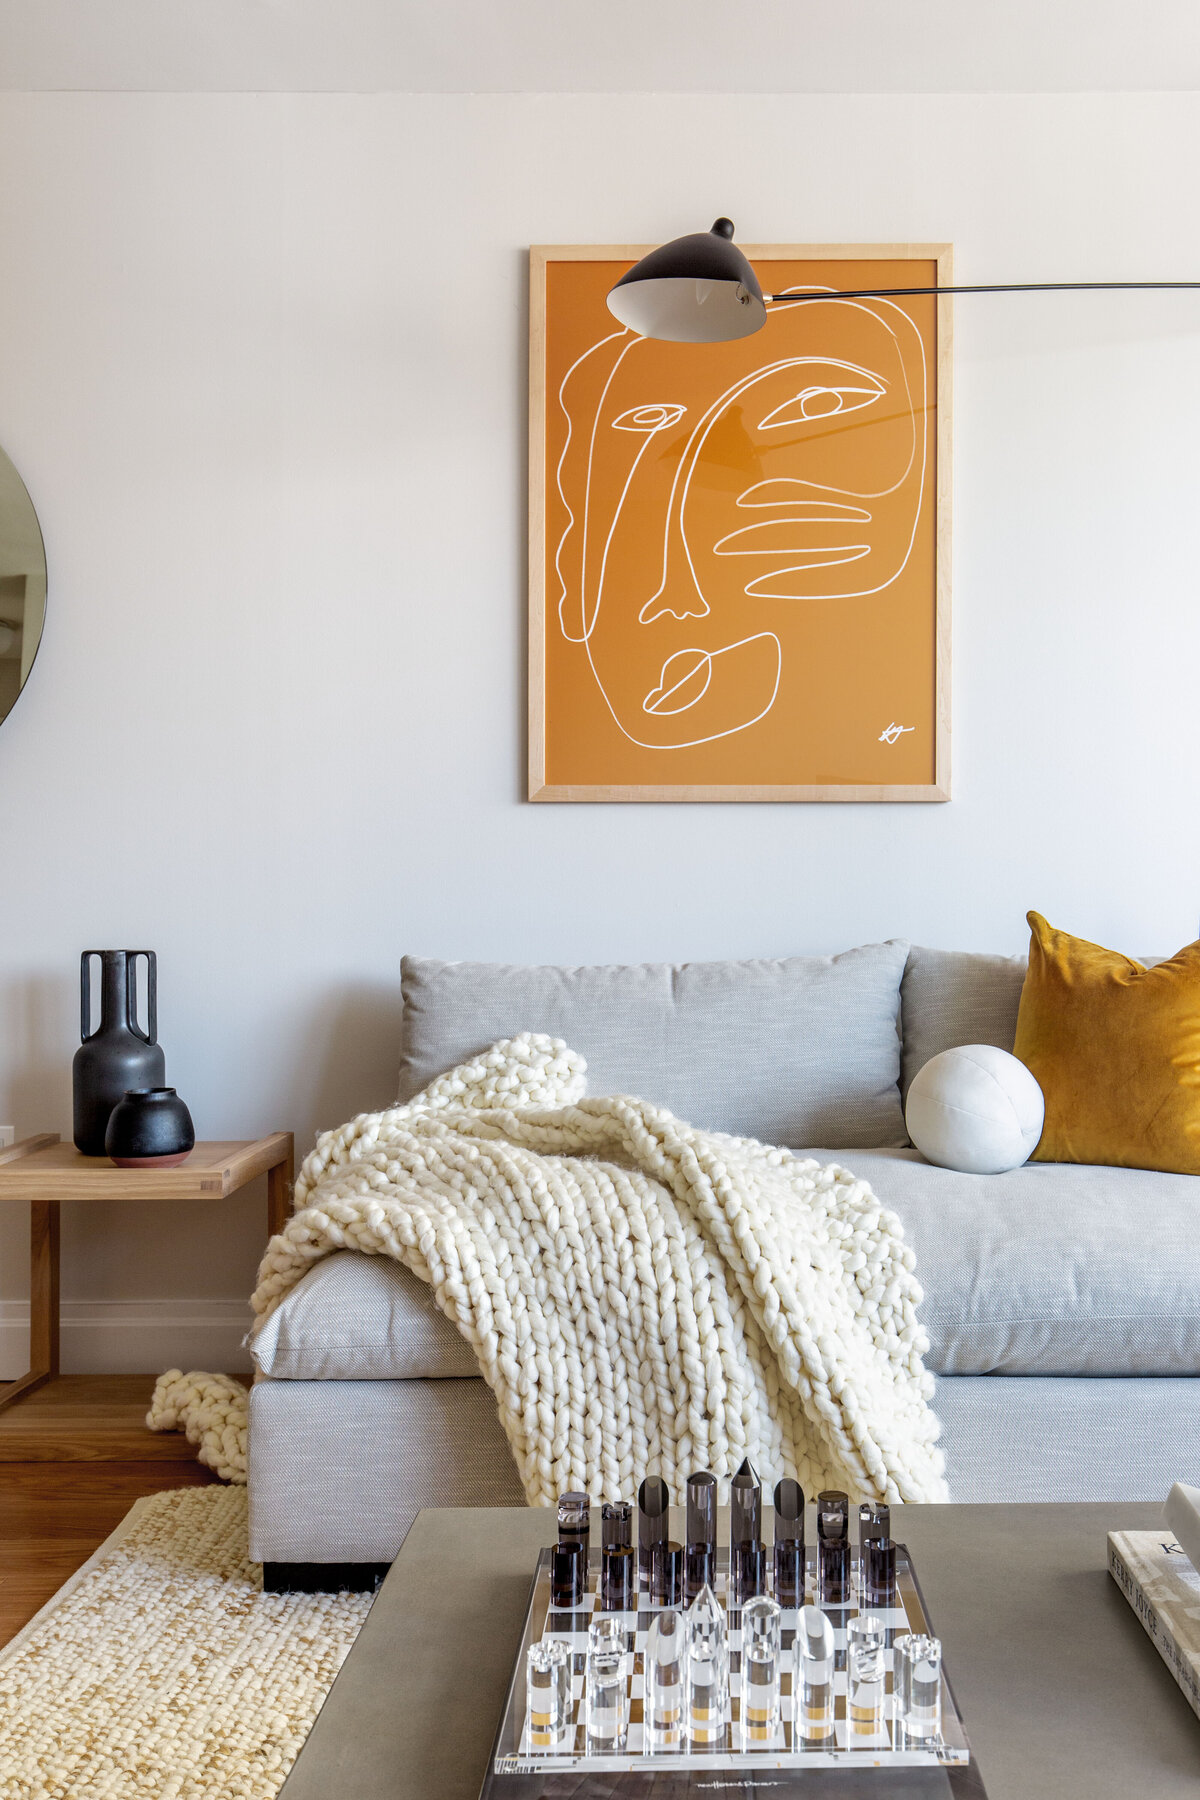 Living room with grey armless sofa, yellow abstract artwork on wall, serge mouille style double sconce light, leather armchair, wooden side table, and concrete coffee table with books and decor stacked on top